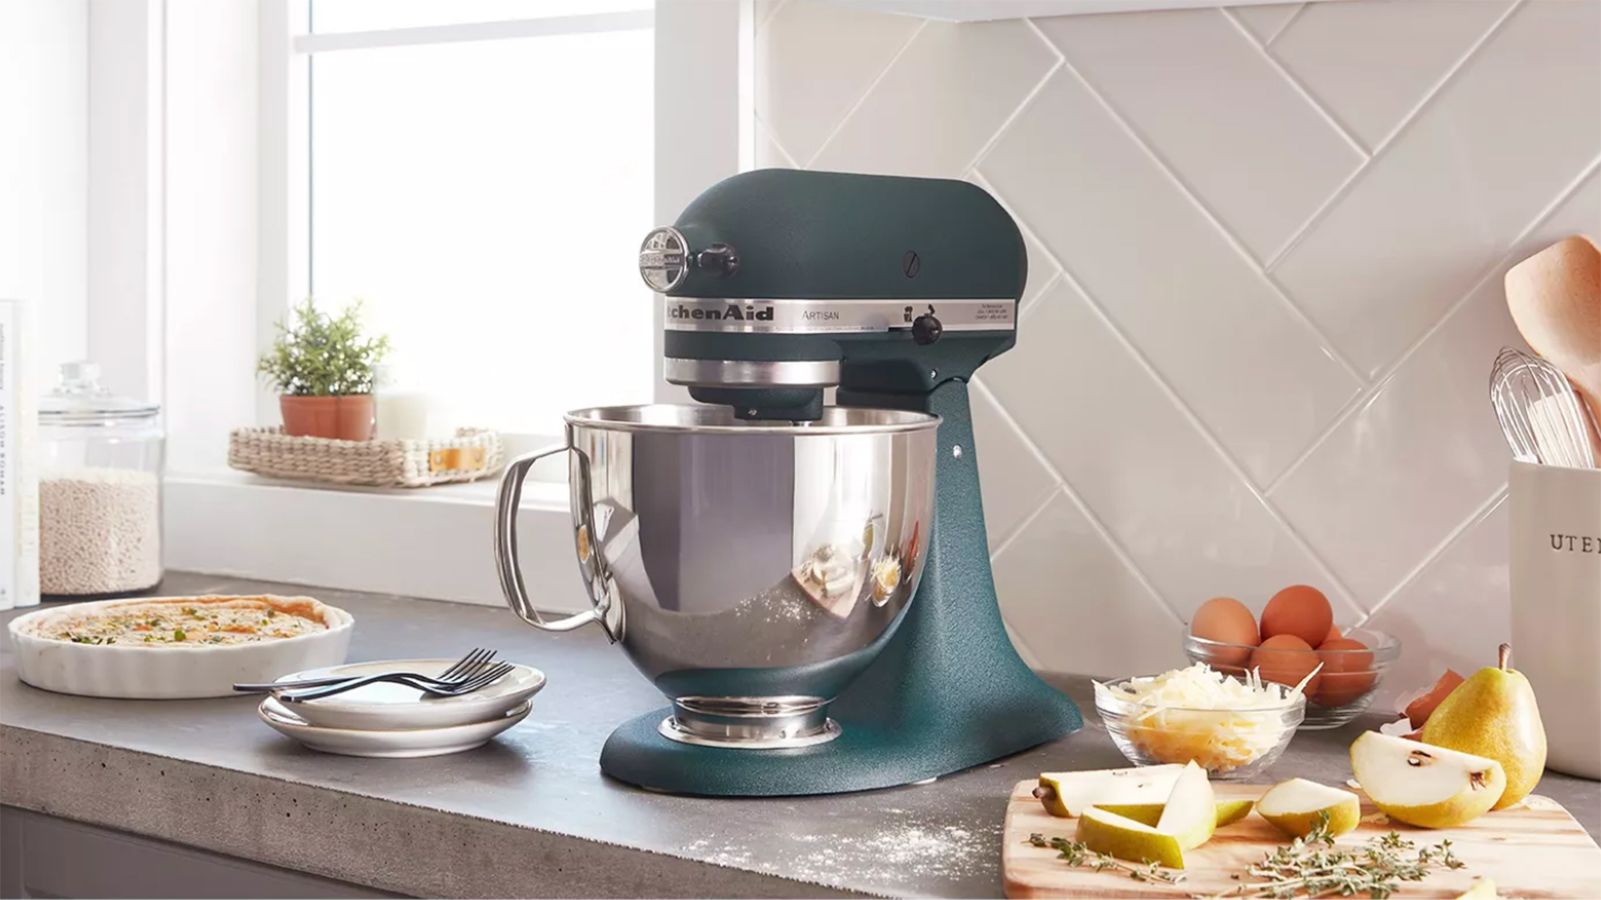 KitchenAid delivers its newest shade to countertops - Home Furnishings News